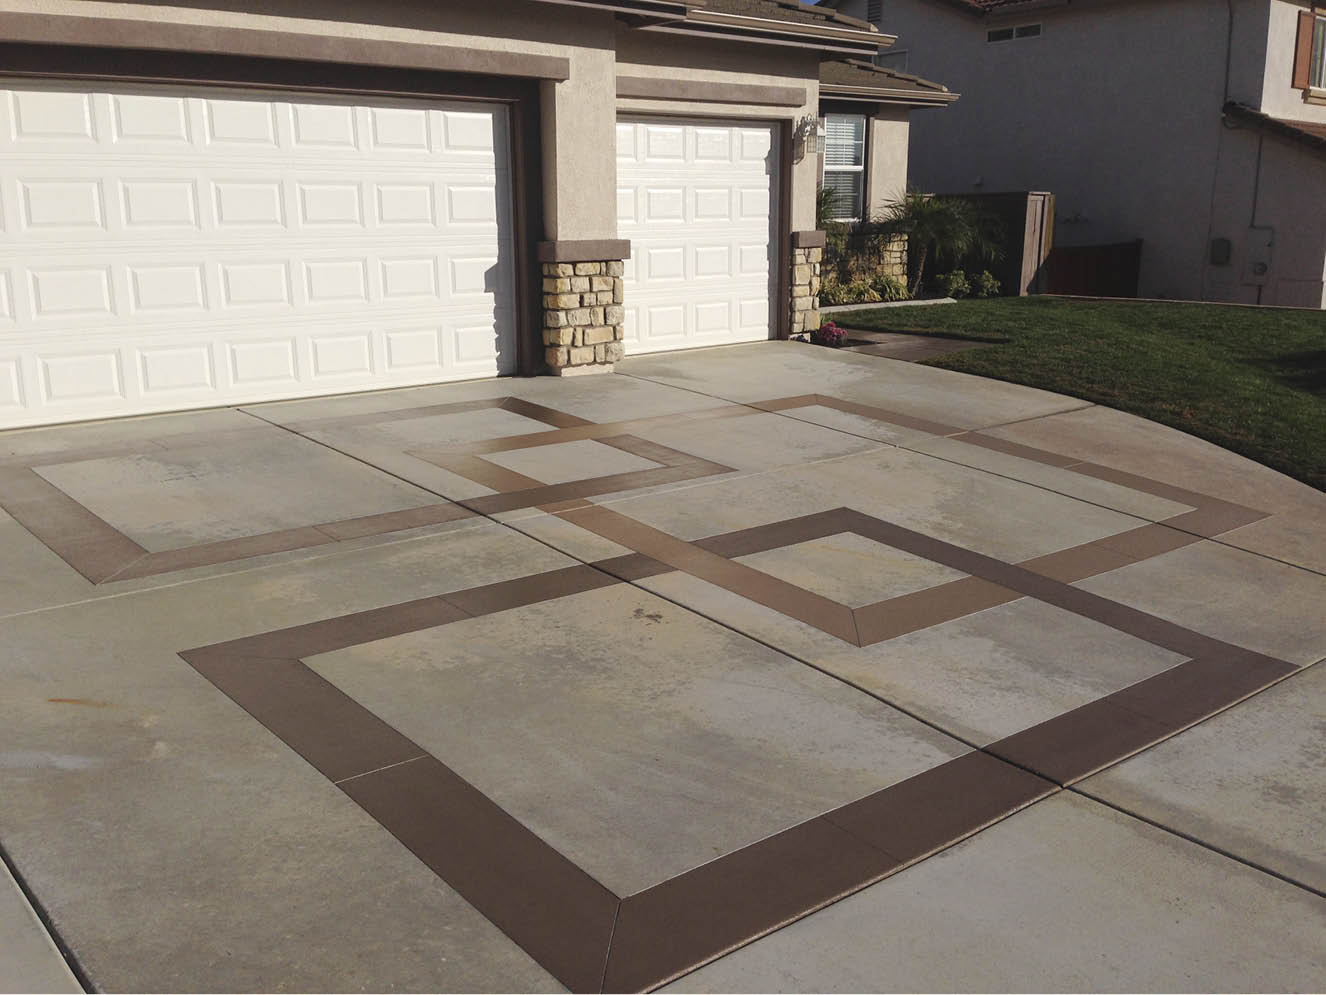 Geometric designs show off this driveway.